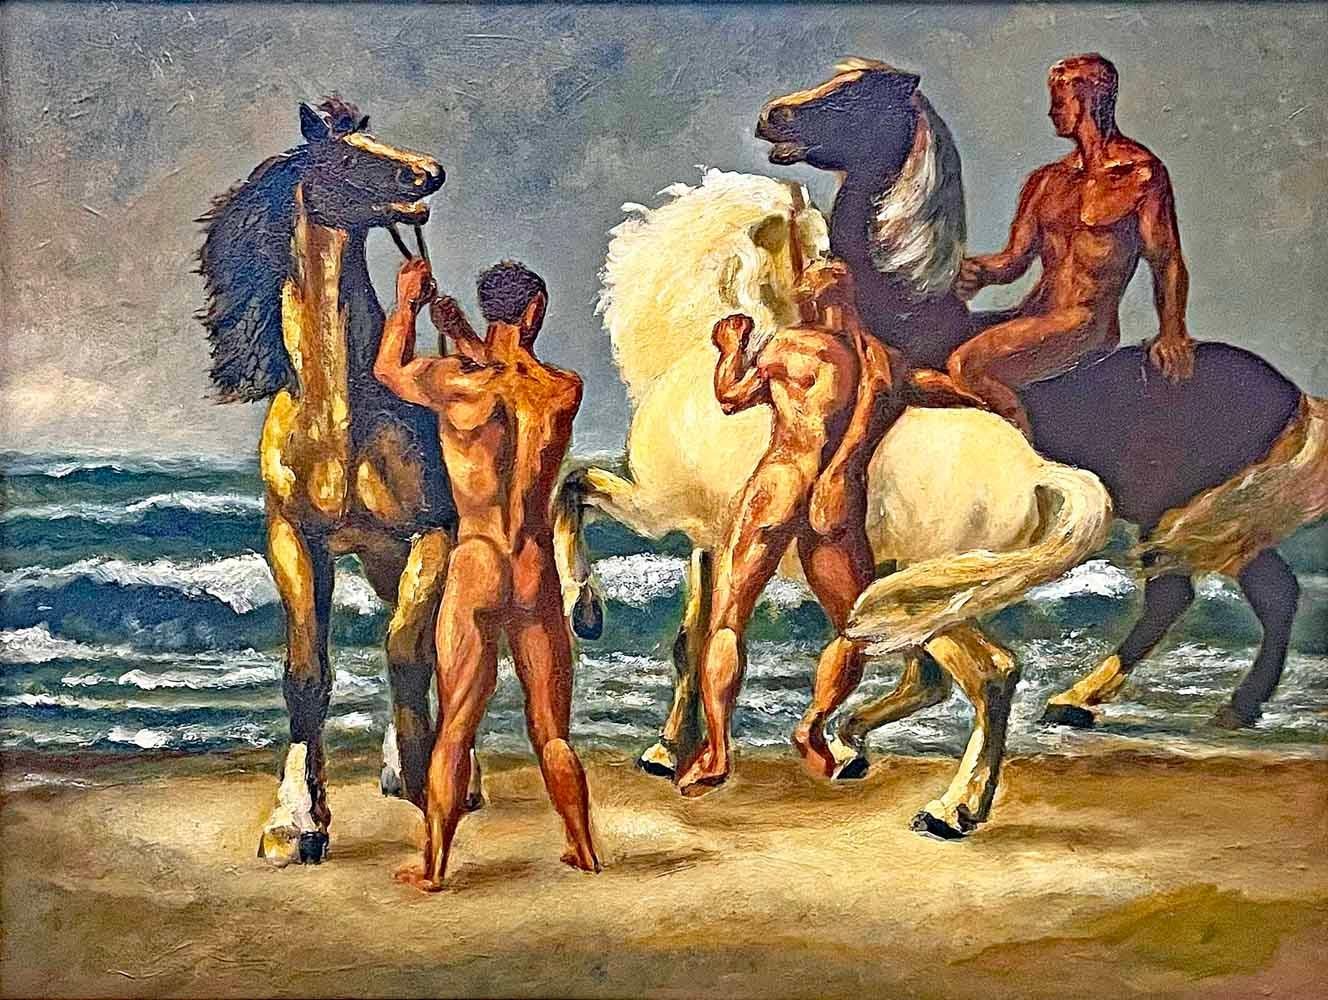 Continuing a tradition going back decades, Josef Pieper painted a series of seaside scenes with multiple nude male figures, riding and leading horses along the shore, their strong bodies and ruddy complexions suggesting a rugged, untamed existence.